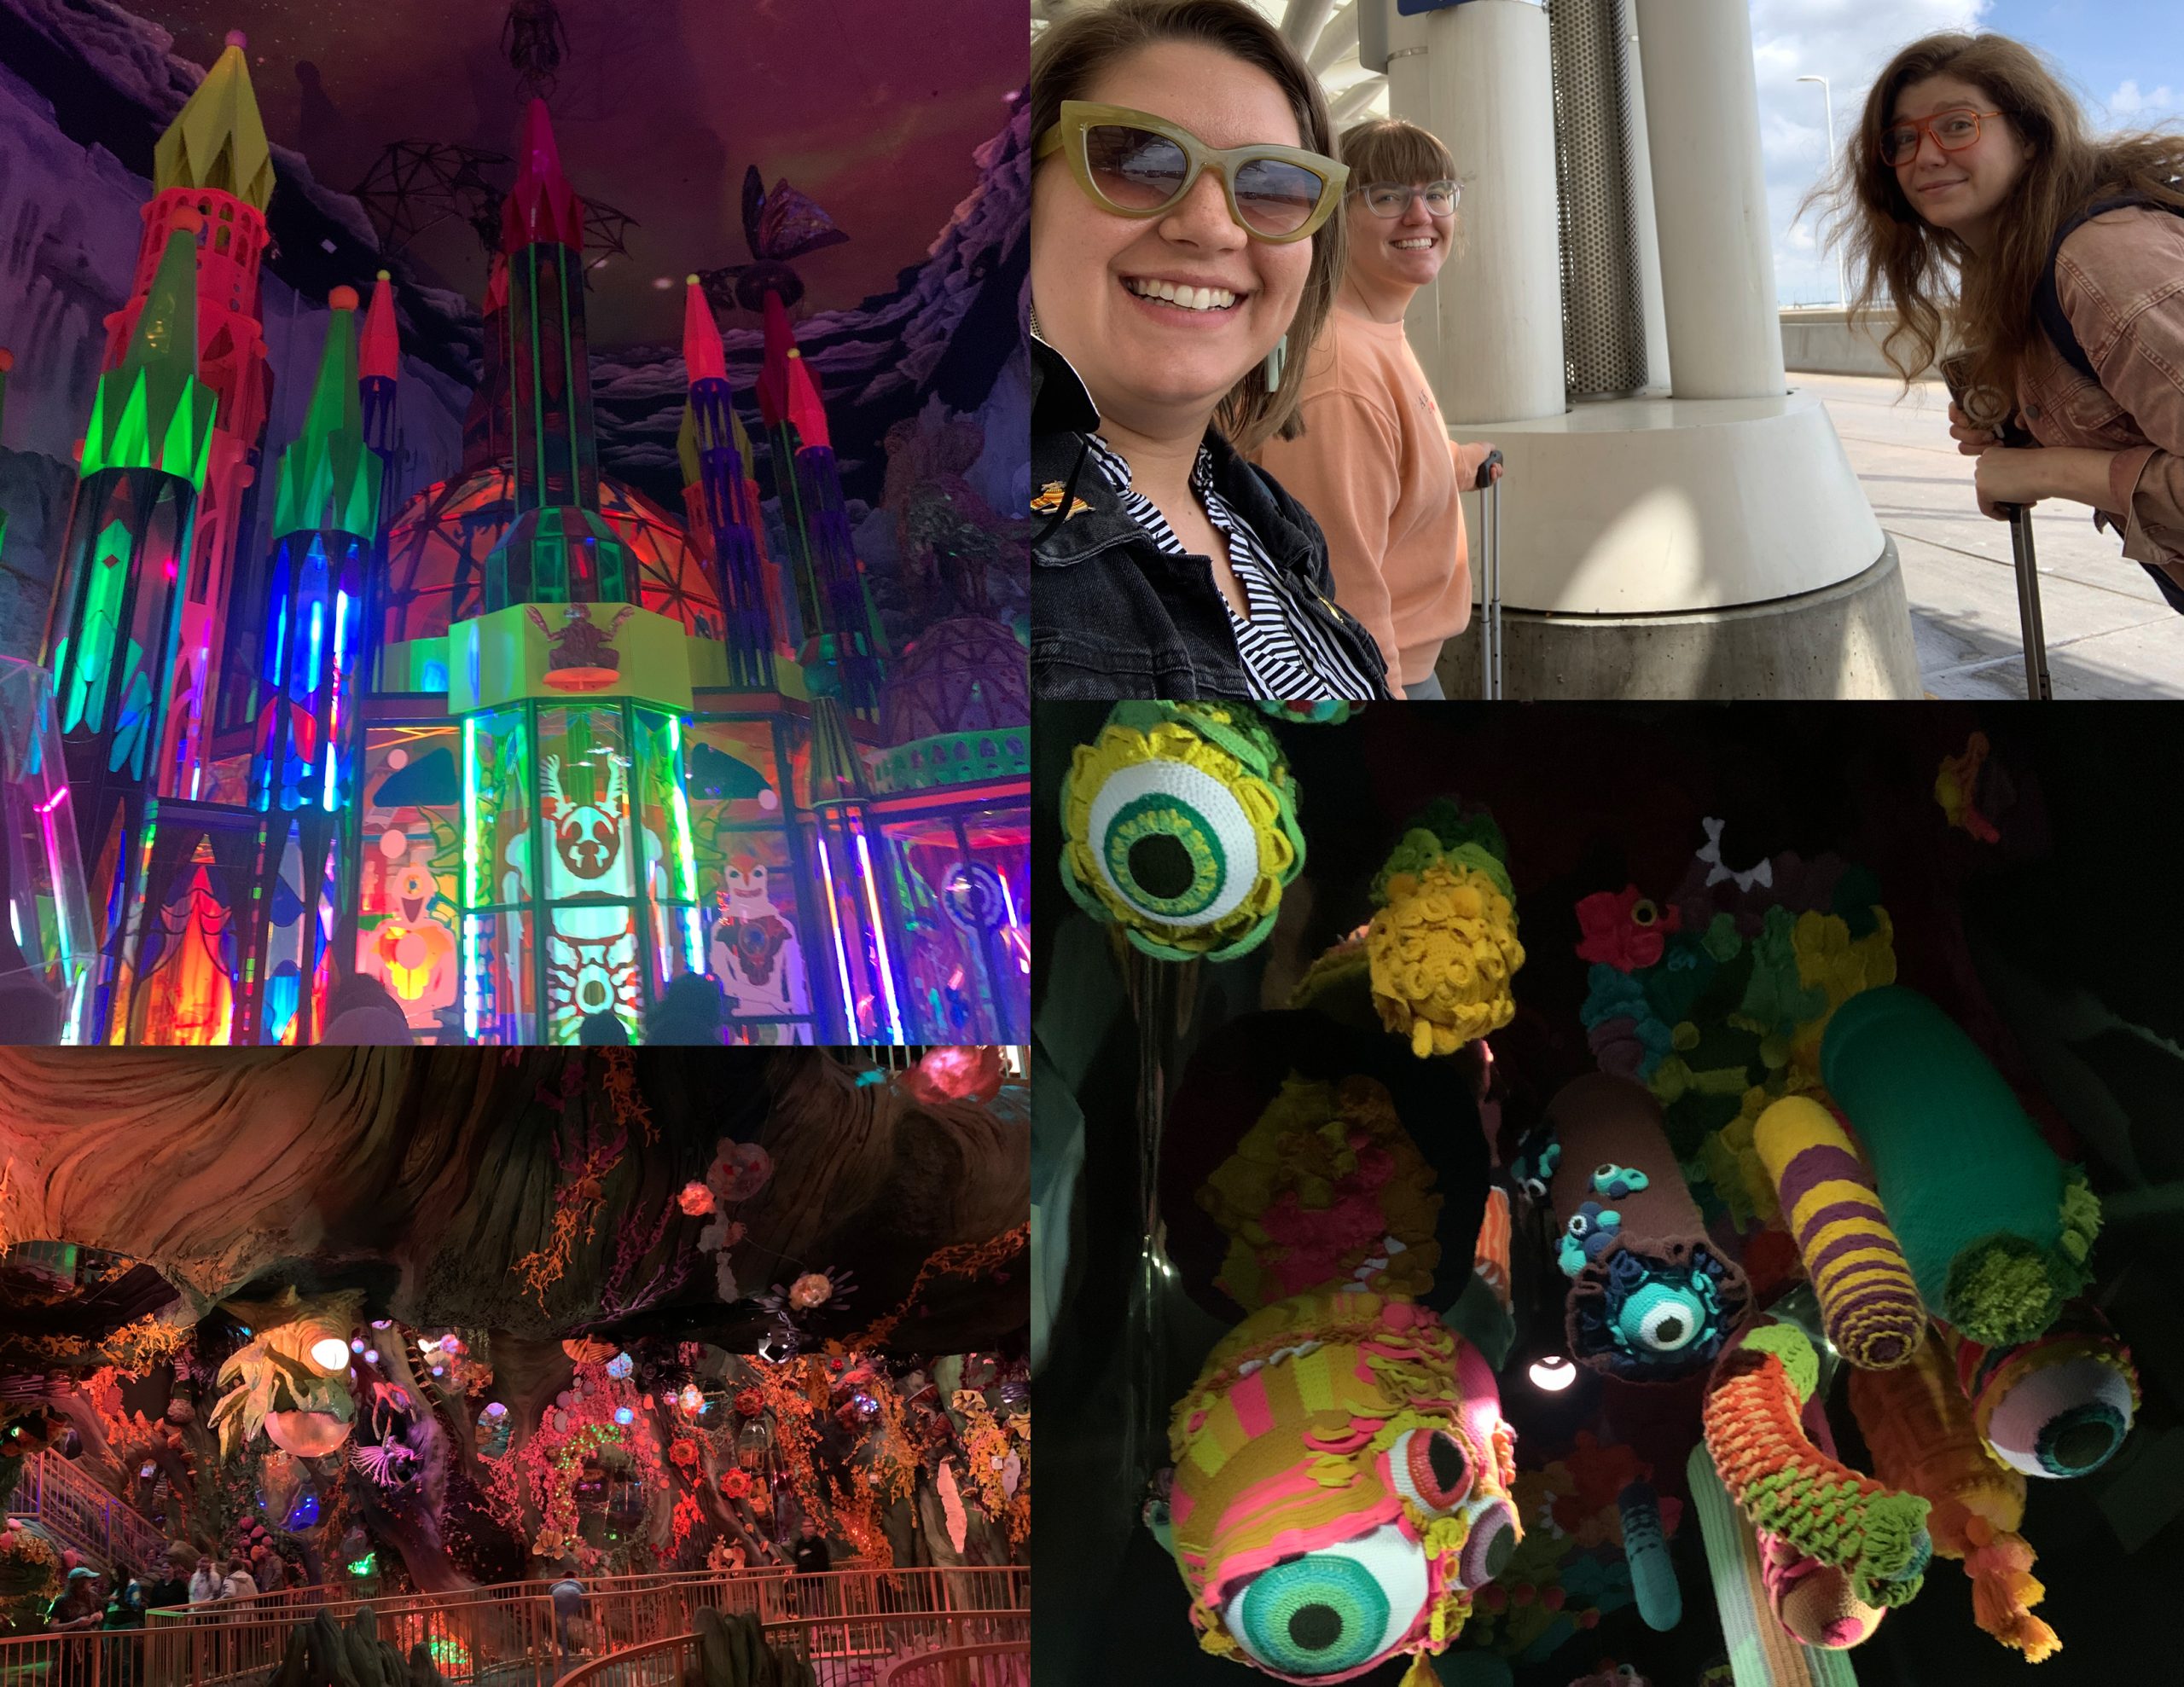 The image shows three immersive, colorful installations at Meow Wolf. The top left depicts a castle-like structure with colorful lights, the bottom left looks like a forest, and the bottom right are sculptural eyeballs made out of fiber hanging down from the ceiling. The top right picture shows Museum staff members Rachel, Elaina, and Amalia waiting outside the Denver ariport. 